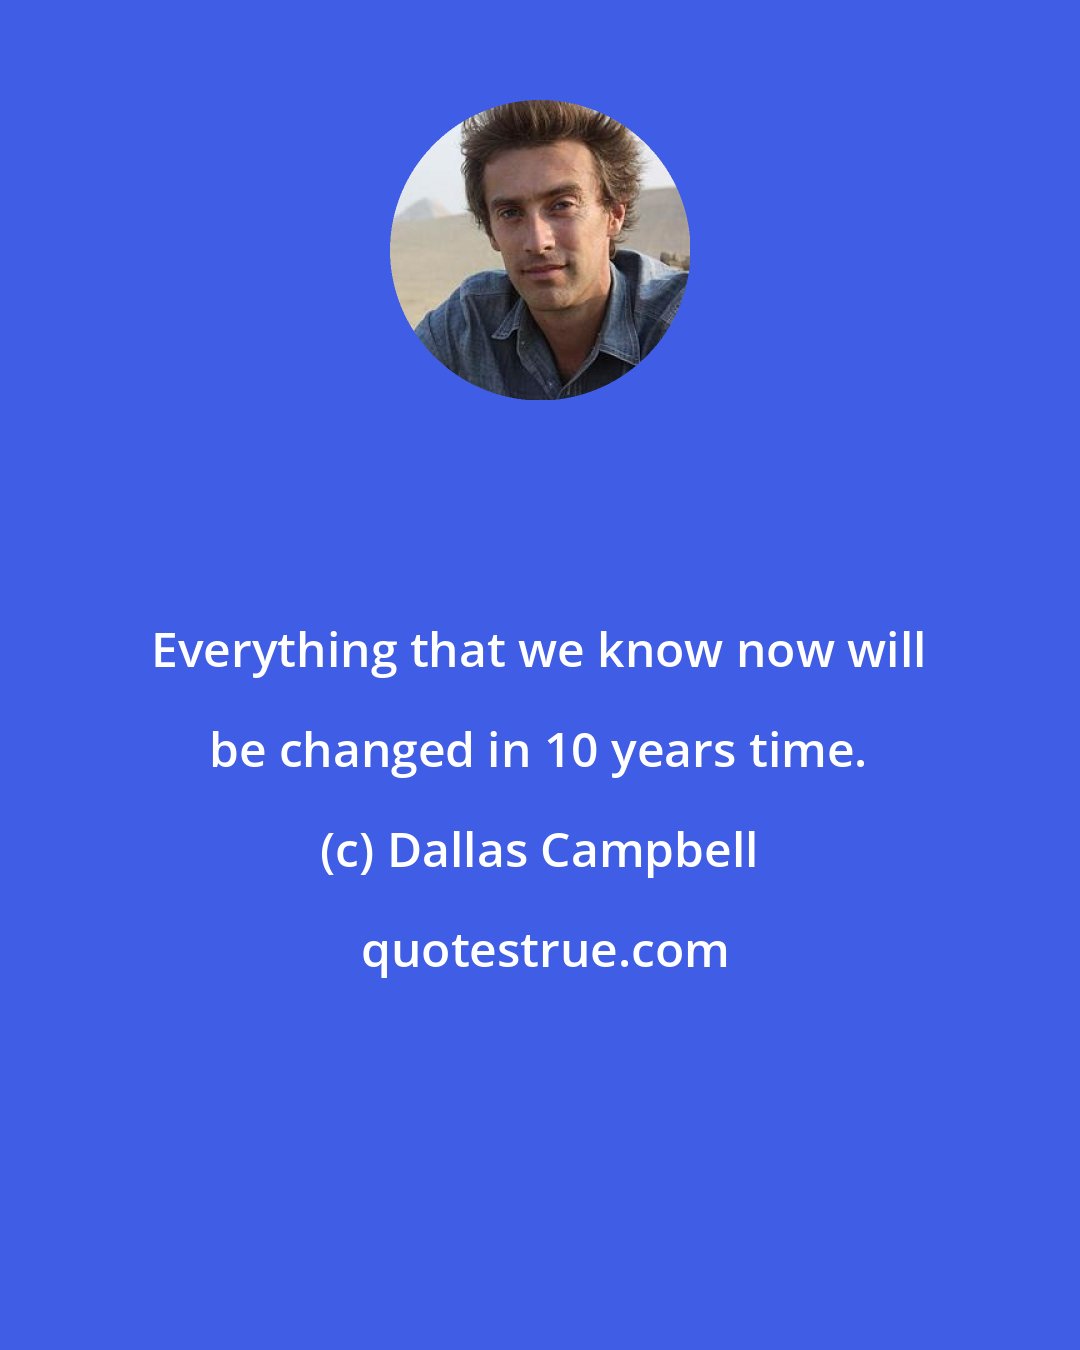 Dallas Campbell: Everything that we know now will be changed in 10 years time.